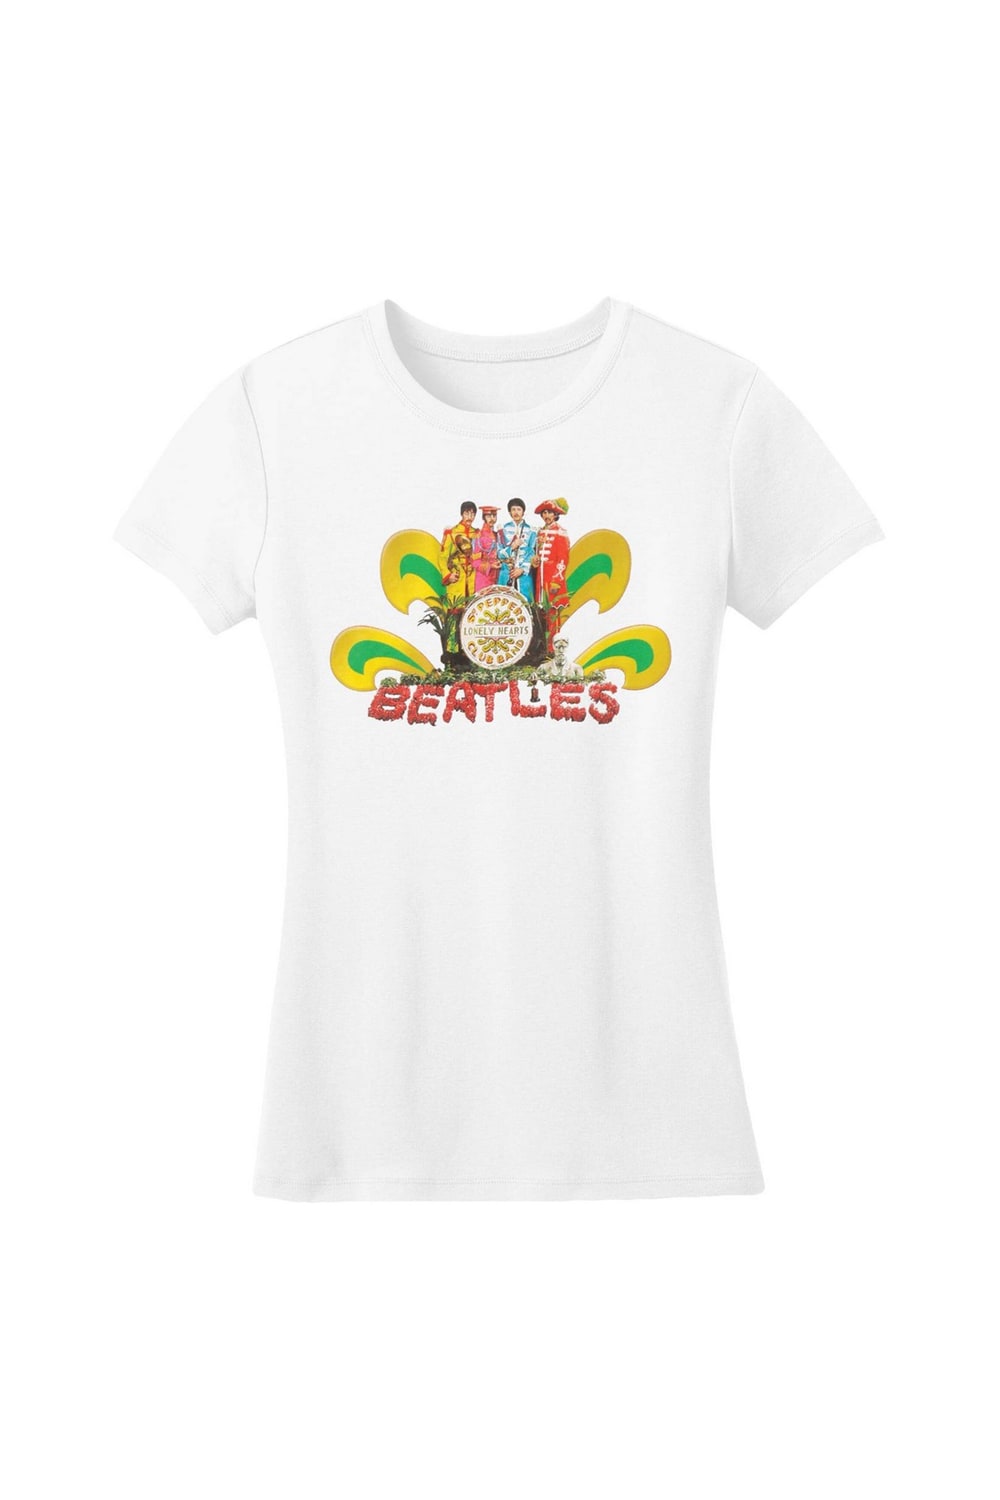 Womens/Ladies Sgt Pepper Naked T-Shirt